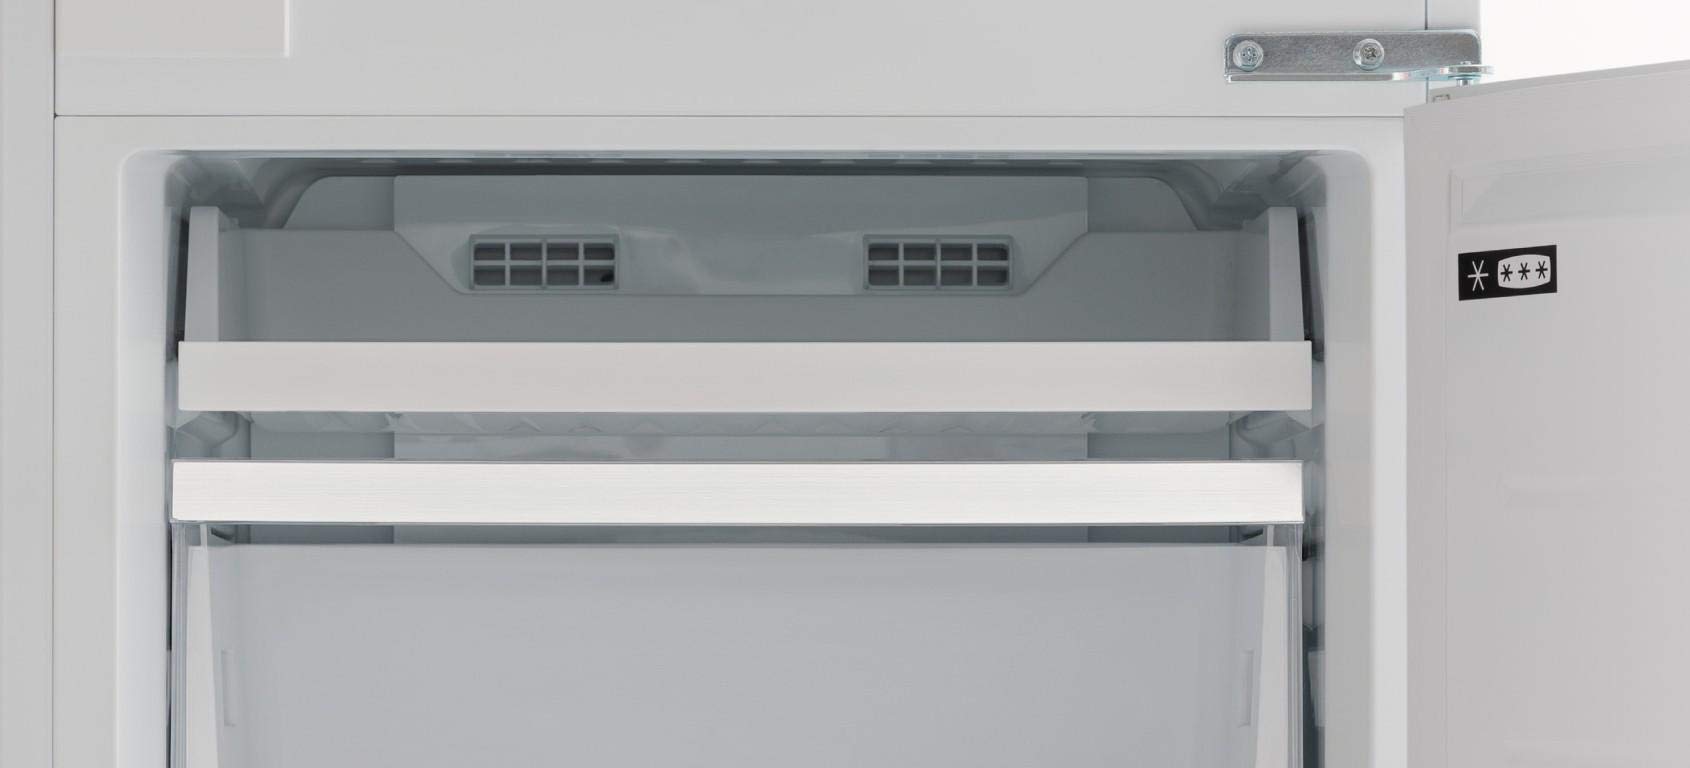 Bertazzoni REF24BMFX 24" Counter Depth Bottom Mount Refrigerator with Surround Cooling System and Total No Frost System - Fingerprint Resistant Stainless Steel